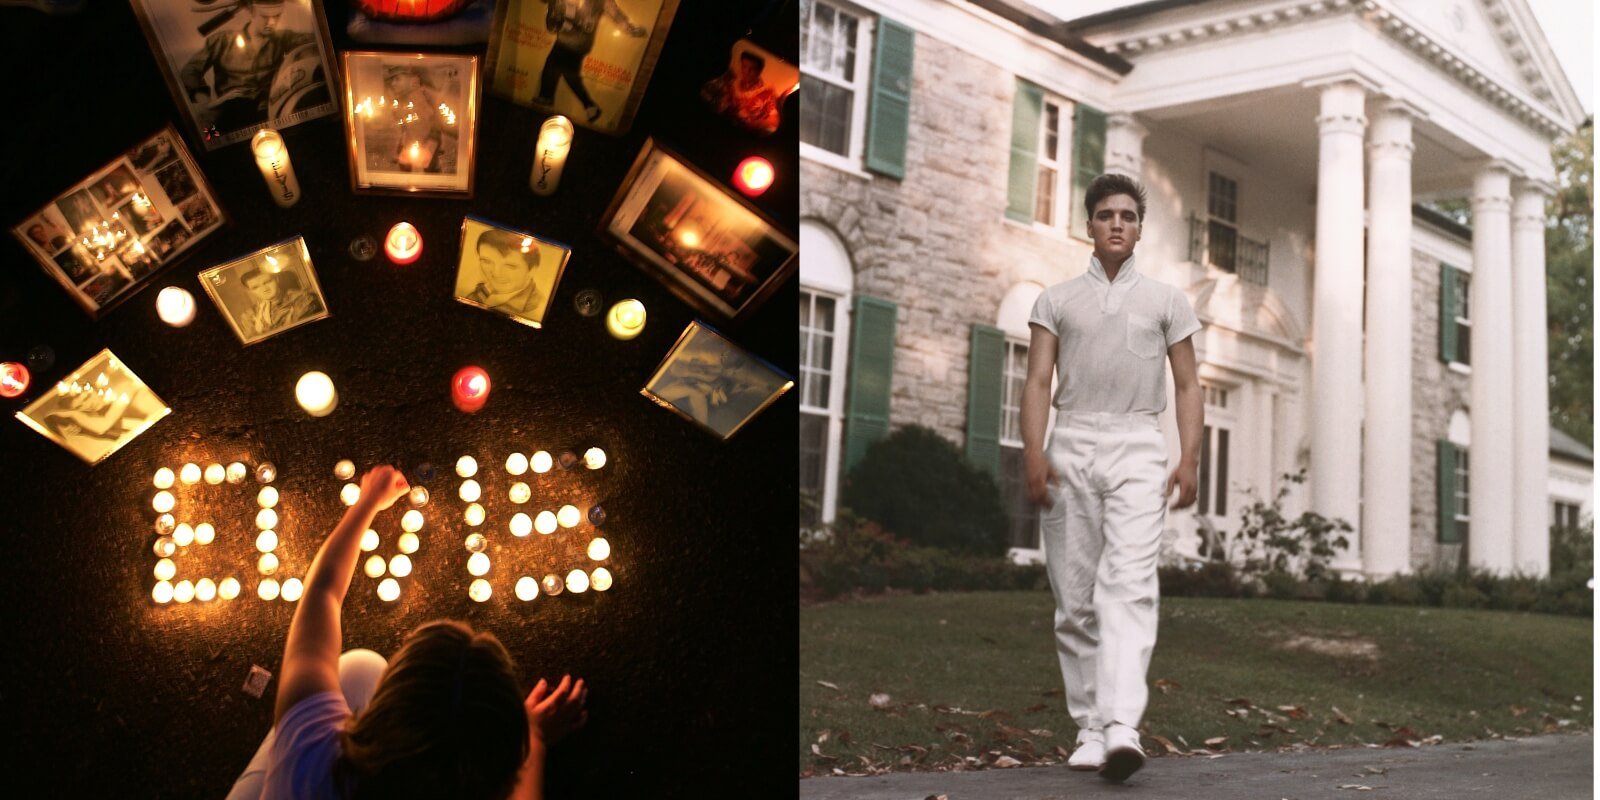 Side-by-side photos of Graceland's candlelight vigil and Elvis Presley outside his Memphis, TN home.